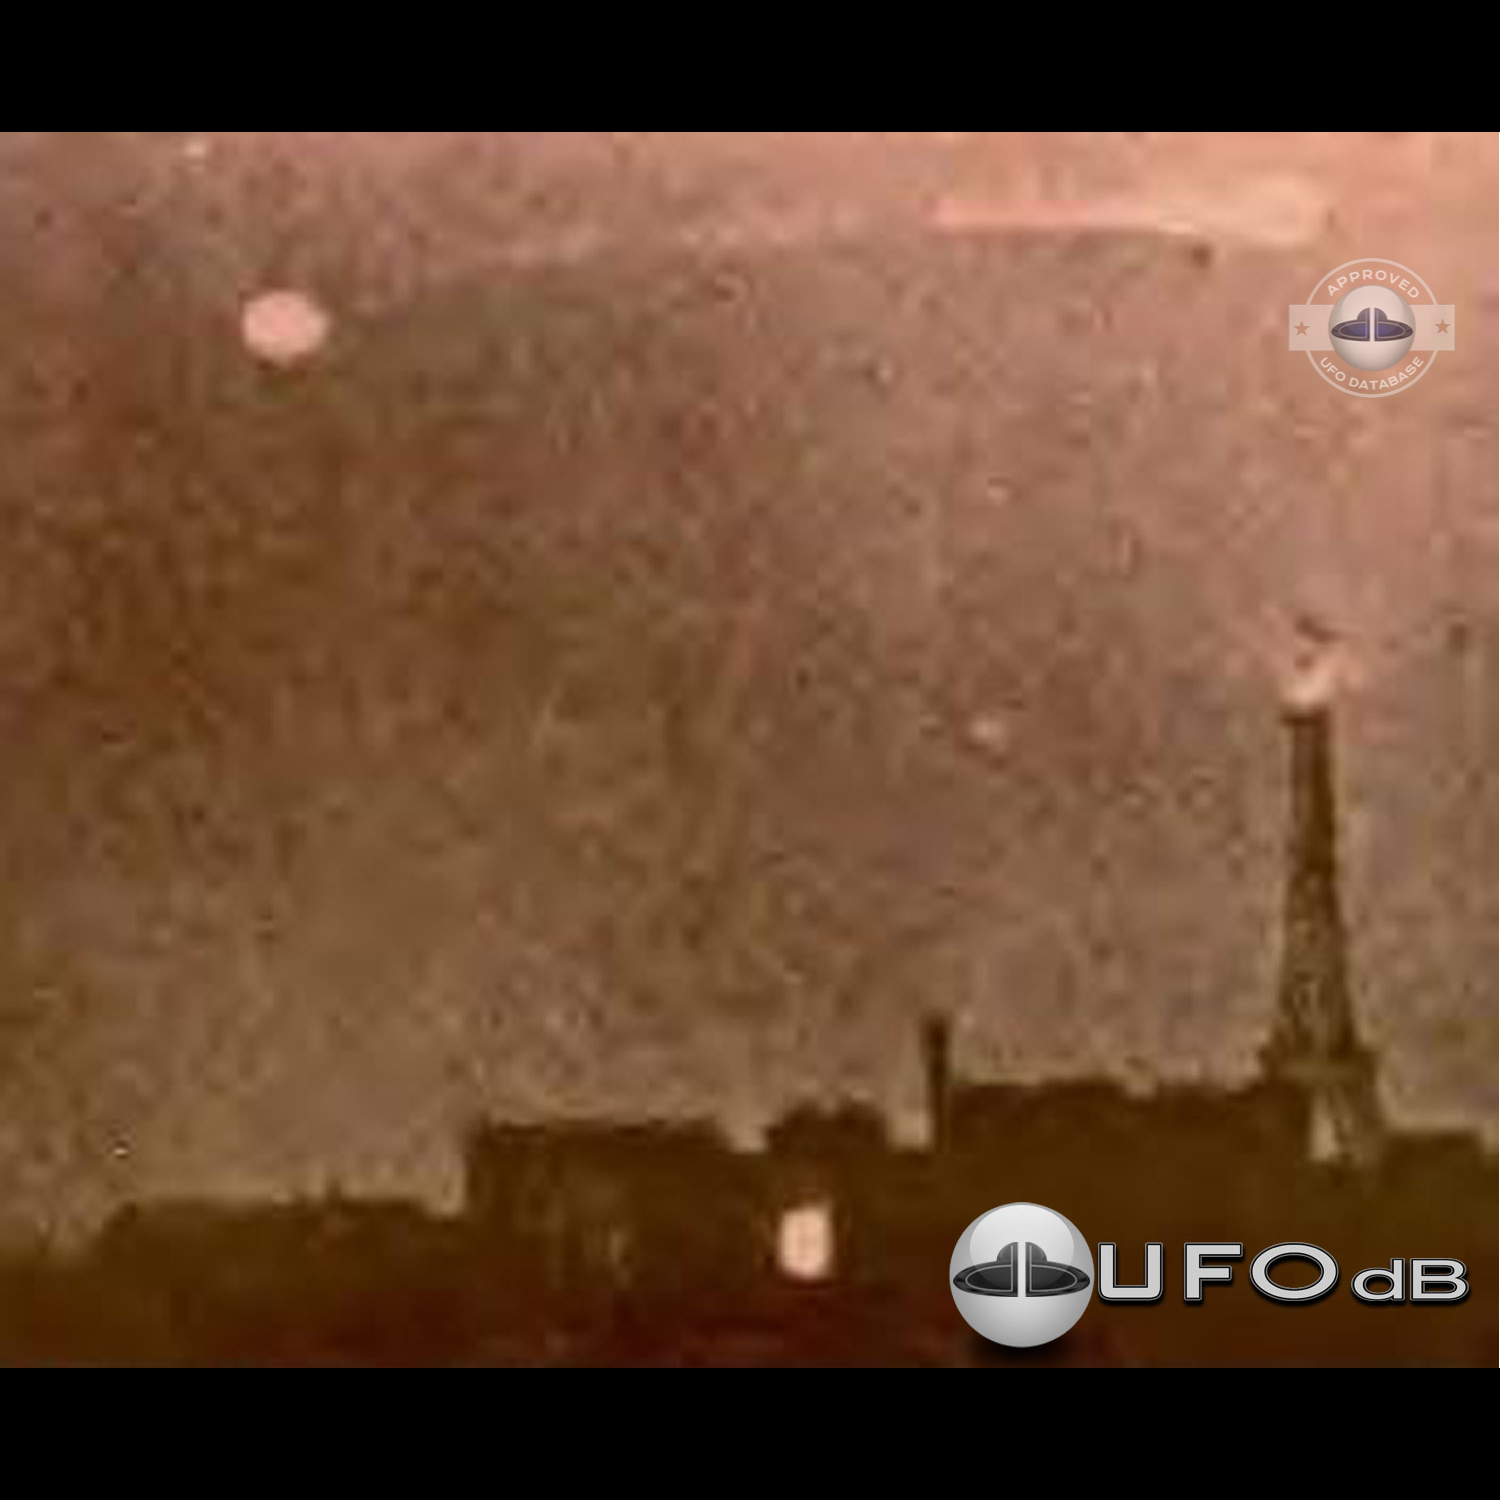 Rare old UFO picture taken near the famous Eiffel tower in Paris UFO Picture #101-1